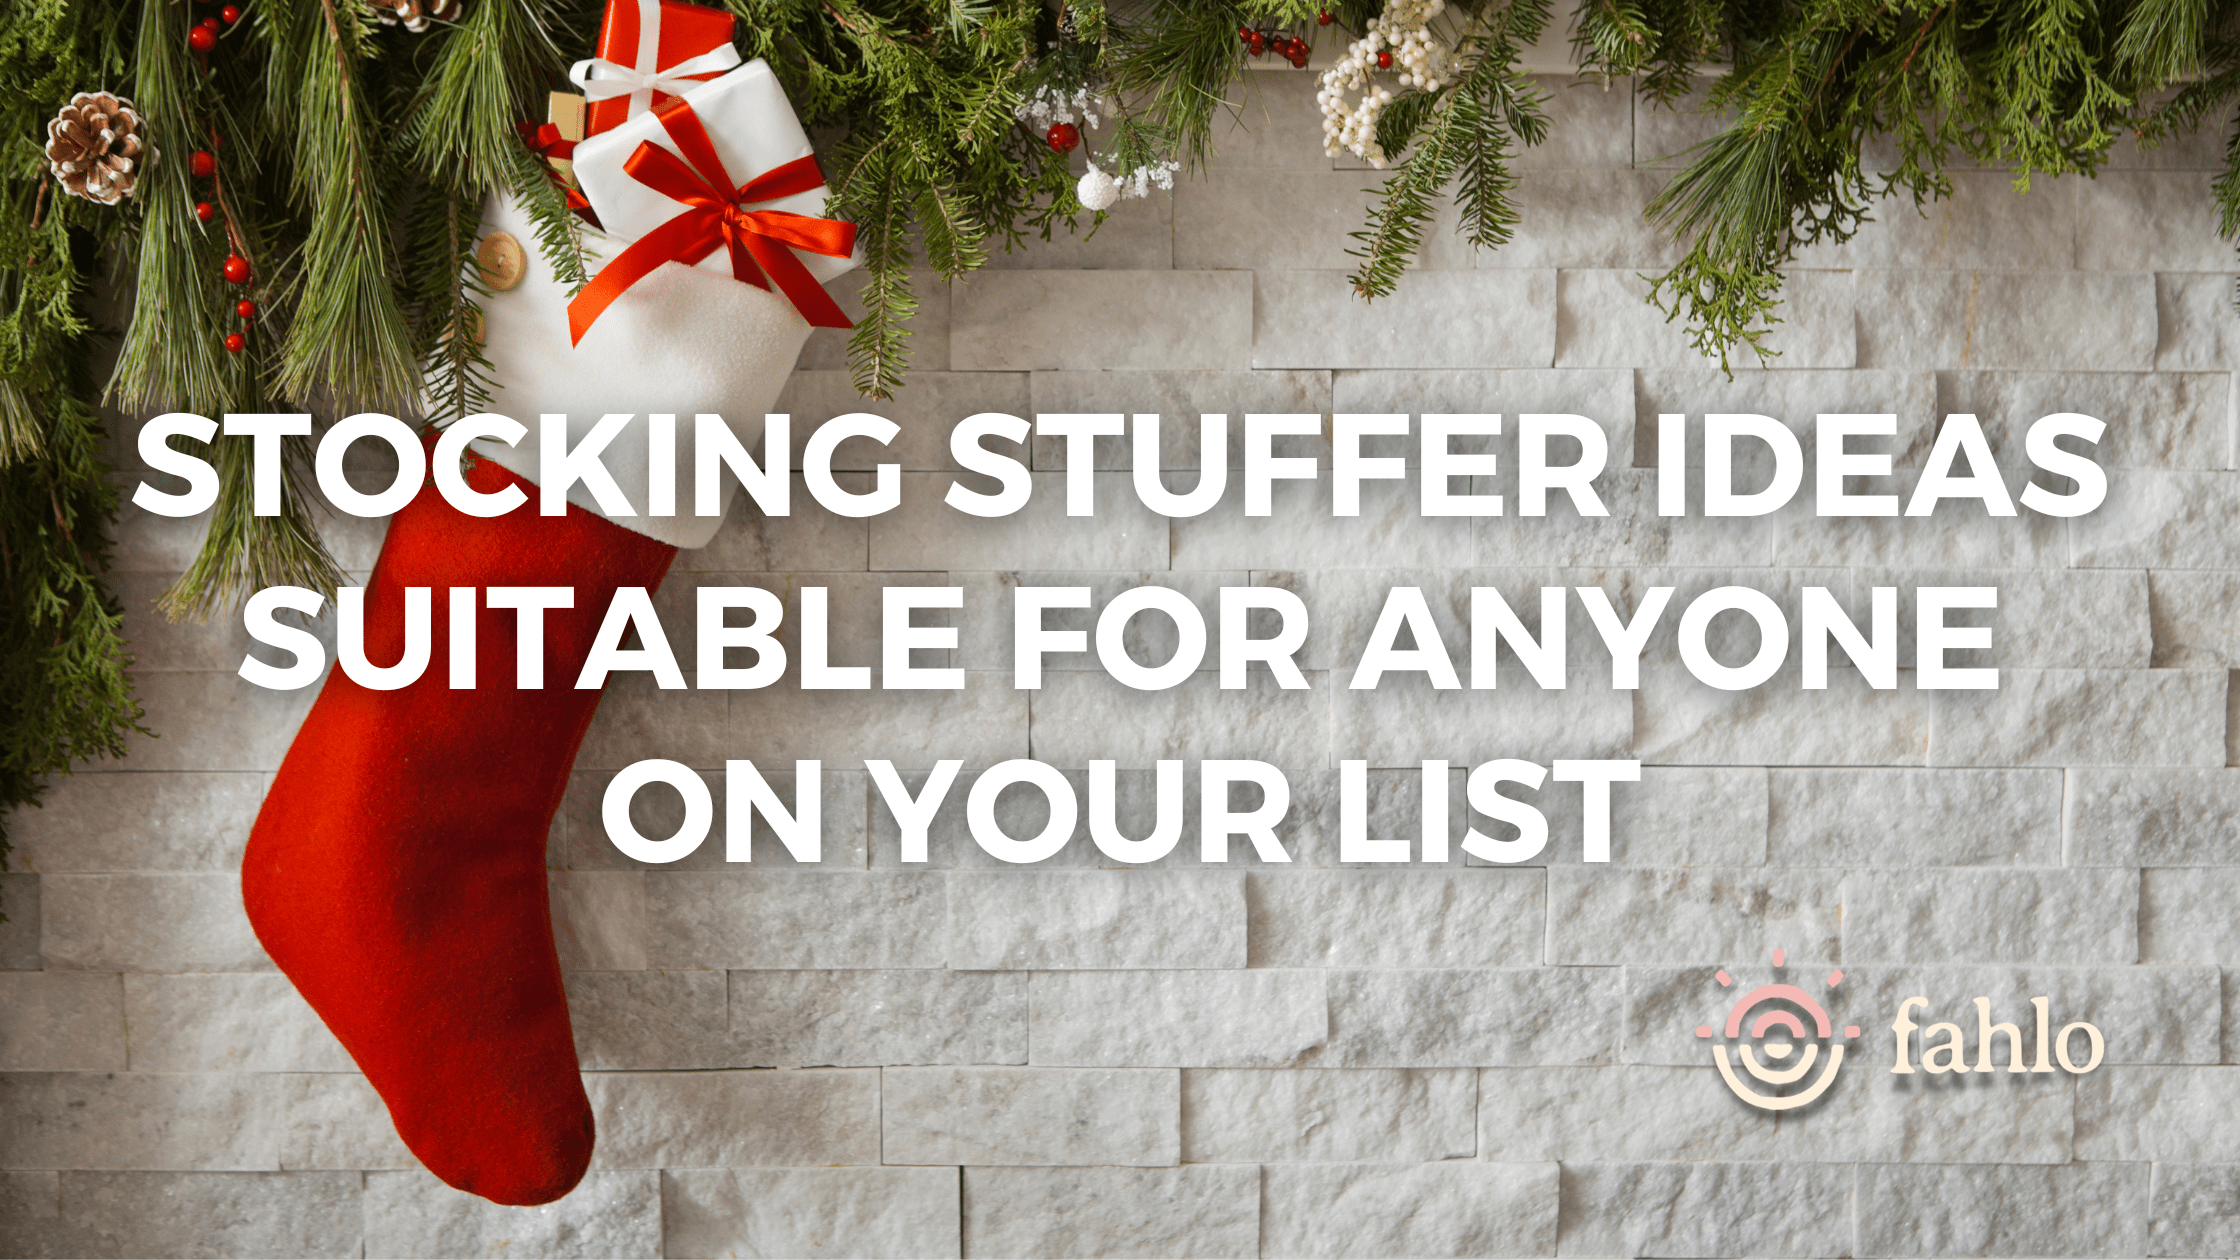 http://myfahlo.com/cdn/shop/articles/Stocking_Stuffer_Ideas_Suitable_For_Anyone_On_Your_List_b19141ac-5bca-4a91-b8f9-d5e2bbb69127.png?v=1701408901